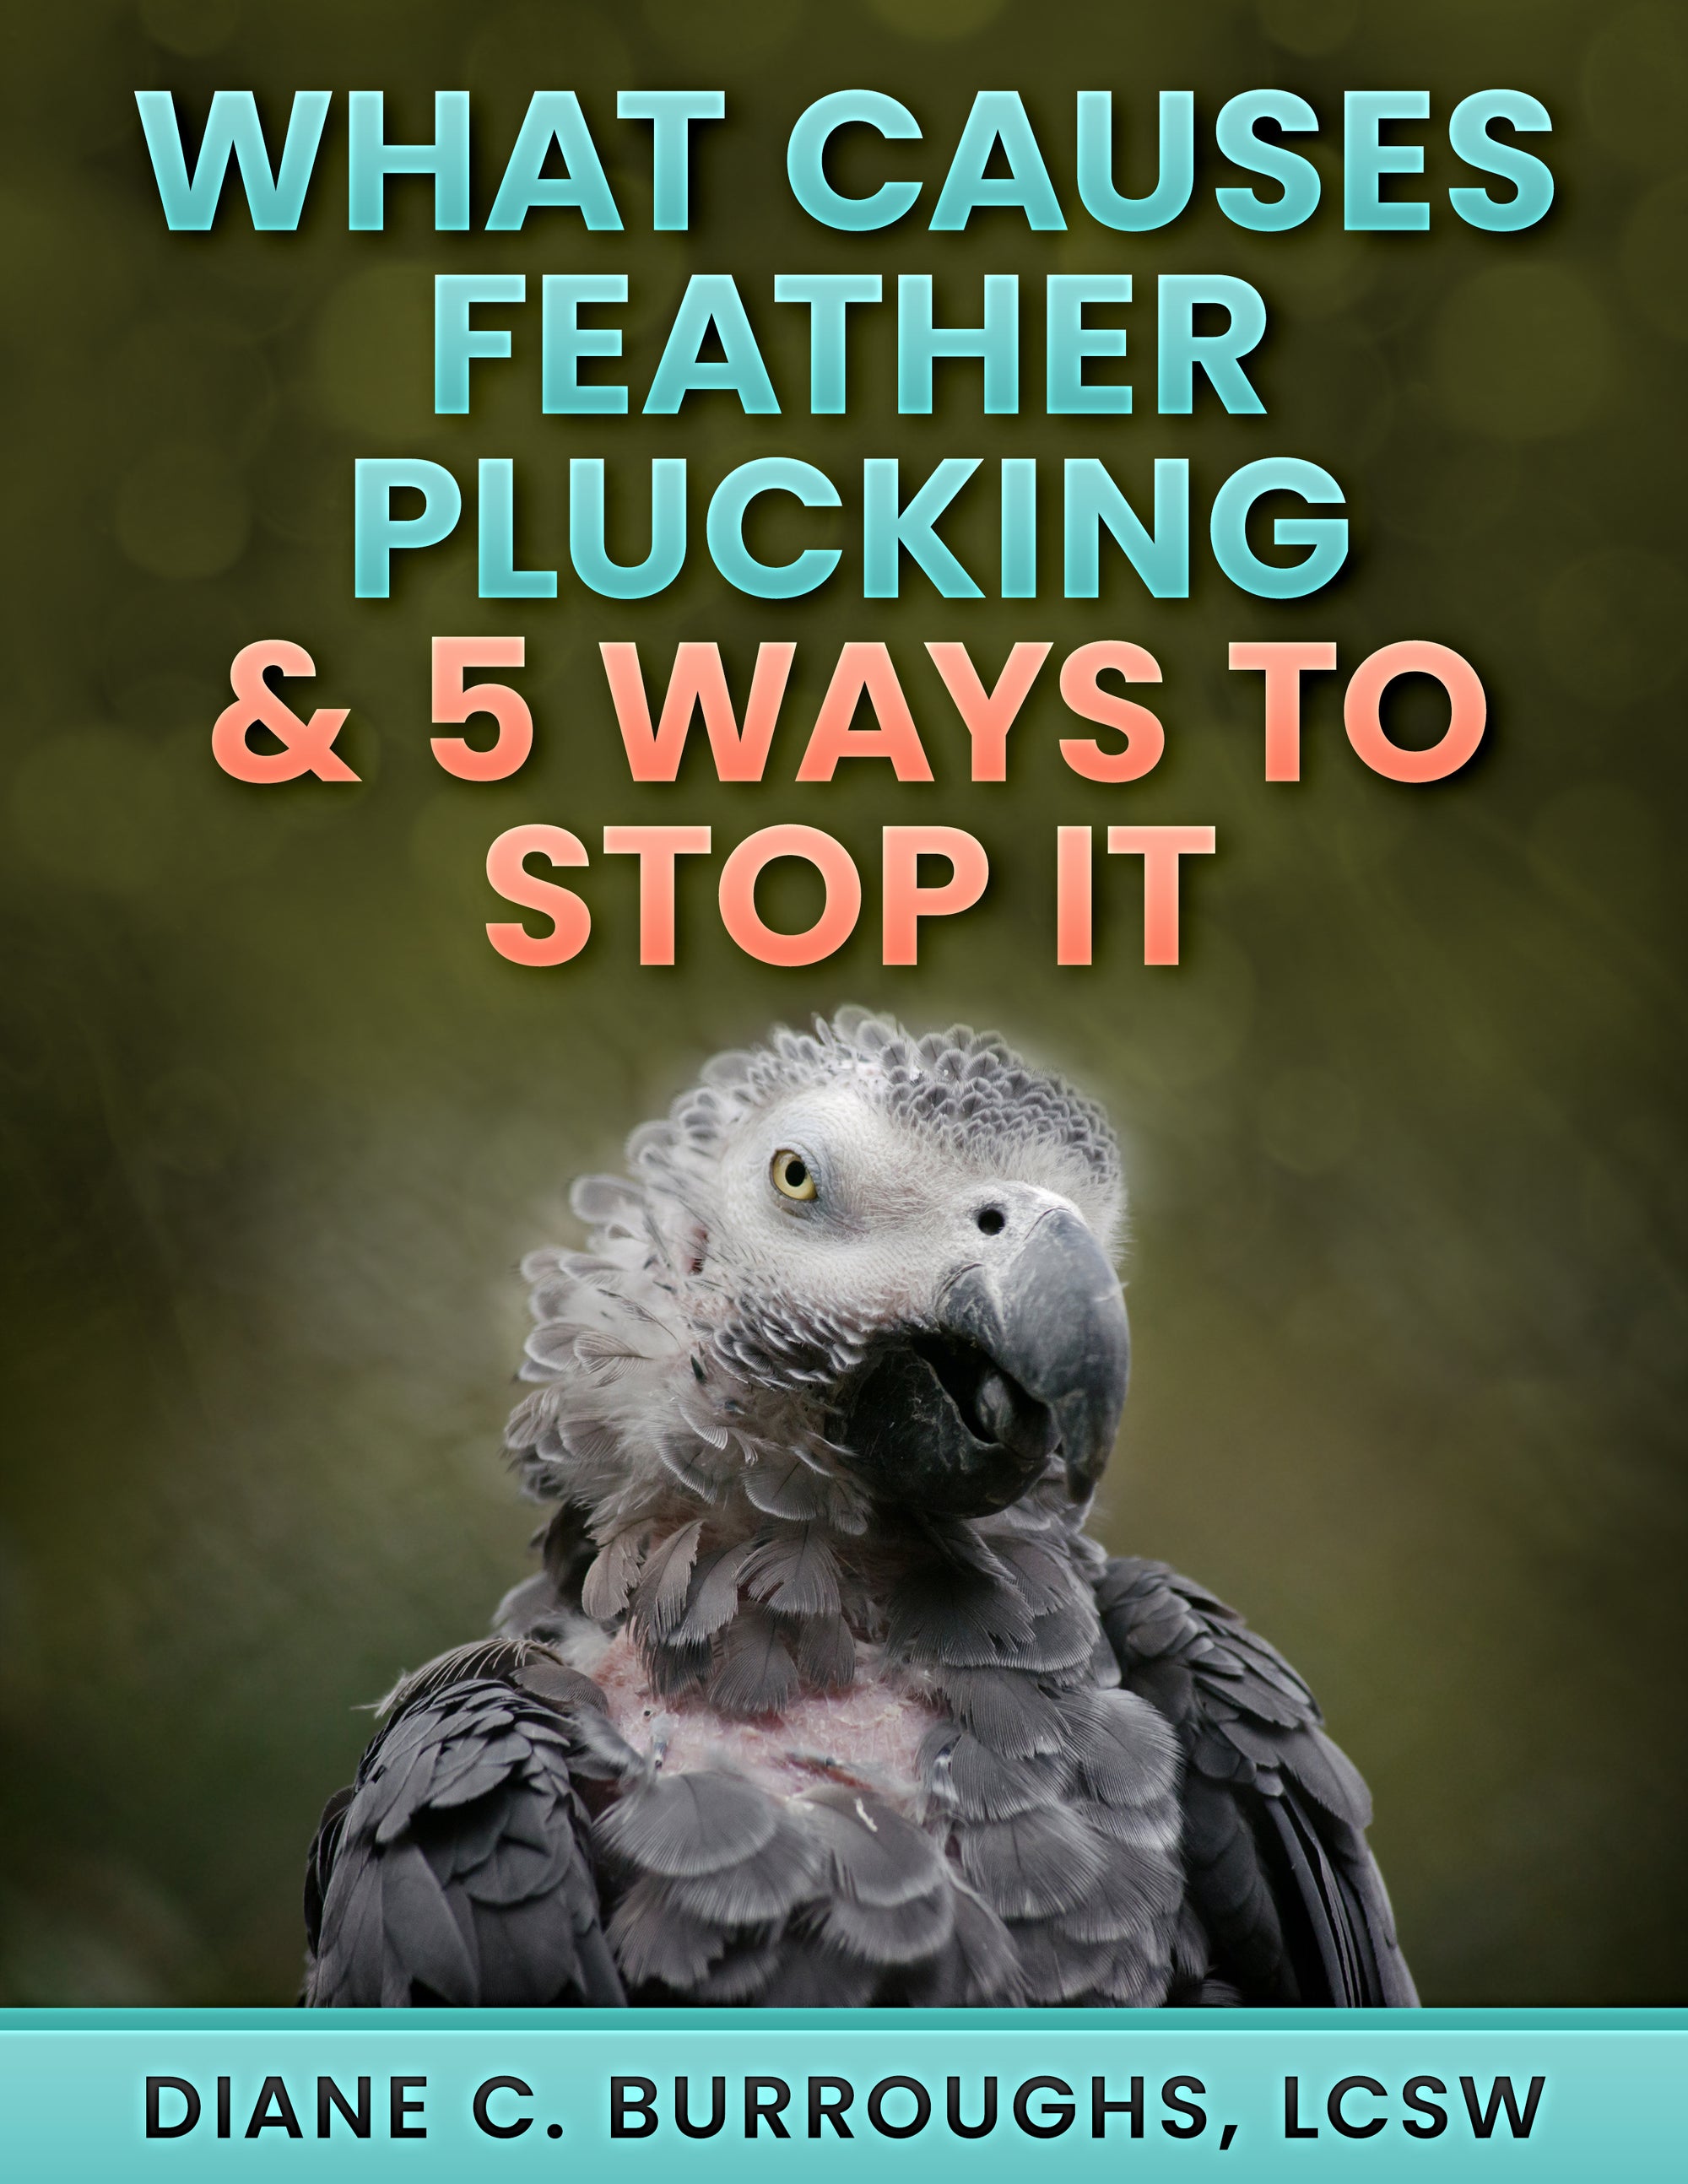 What Causes Feather Plucking & 5 Ways To Stop It - BirdSupplies.com